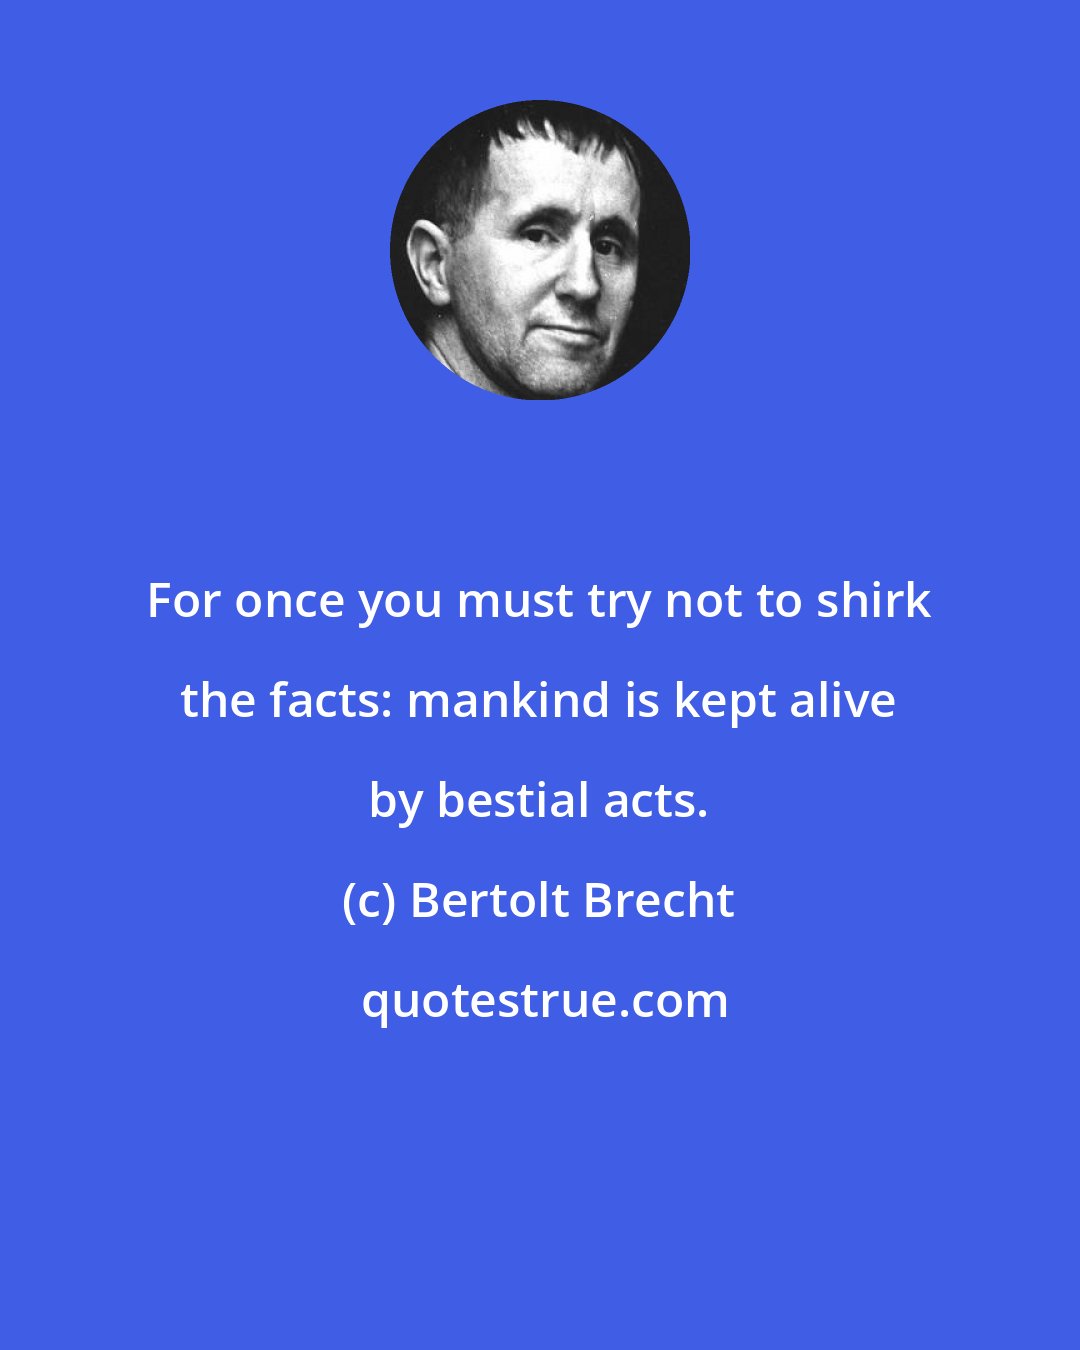 Bertolt Brecht: For once you must try not to shirk the facts: mankind is kept alive by bestial acts.